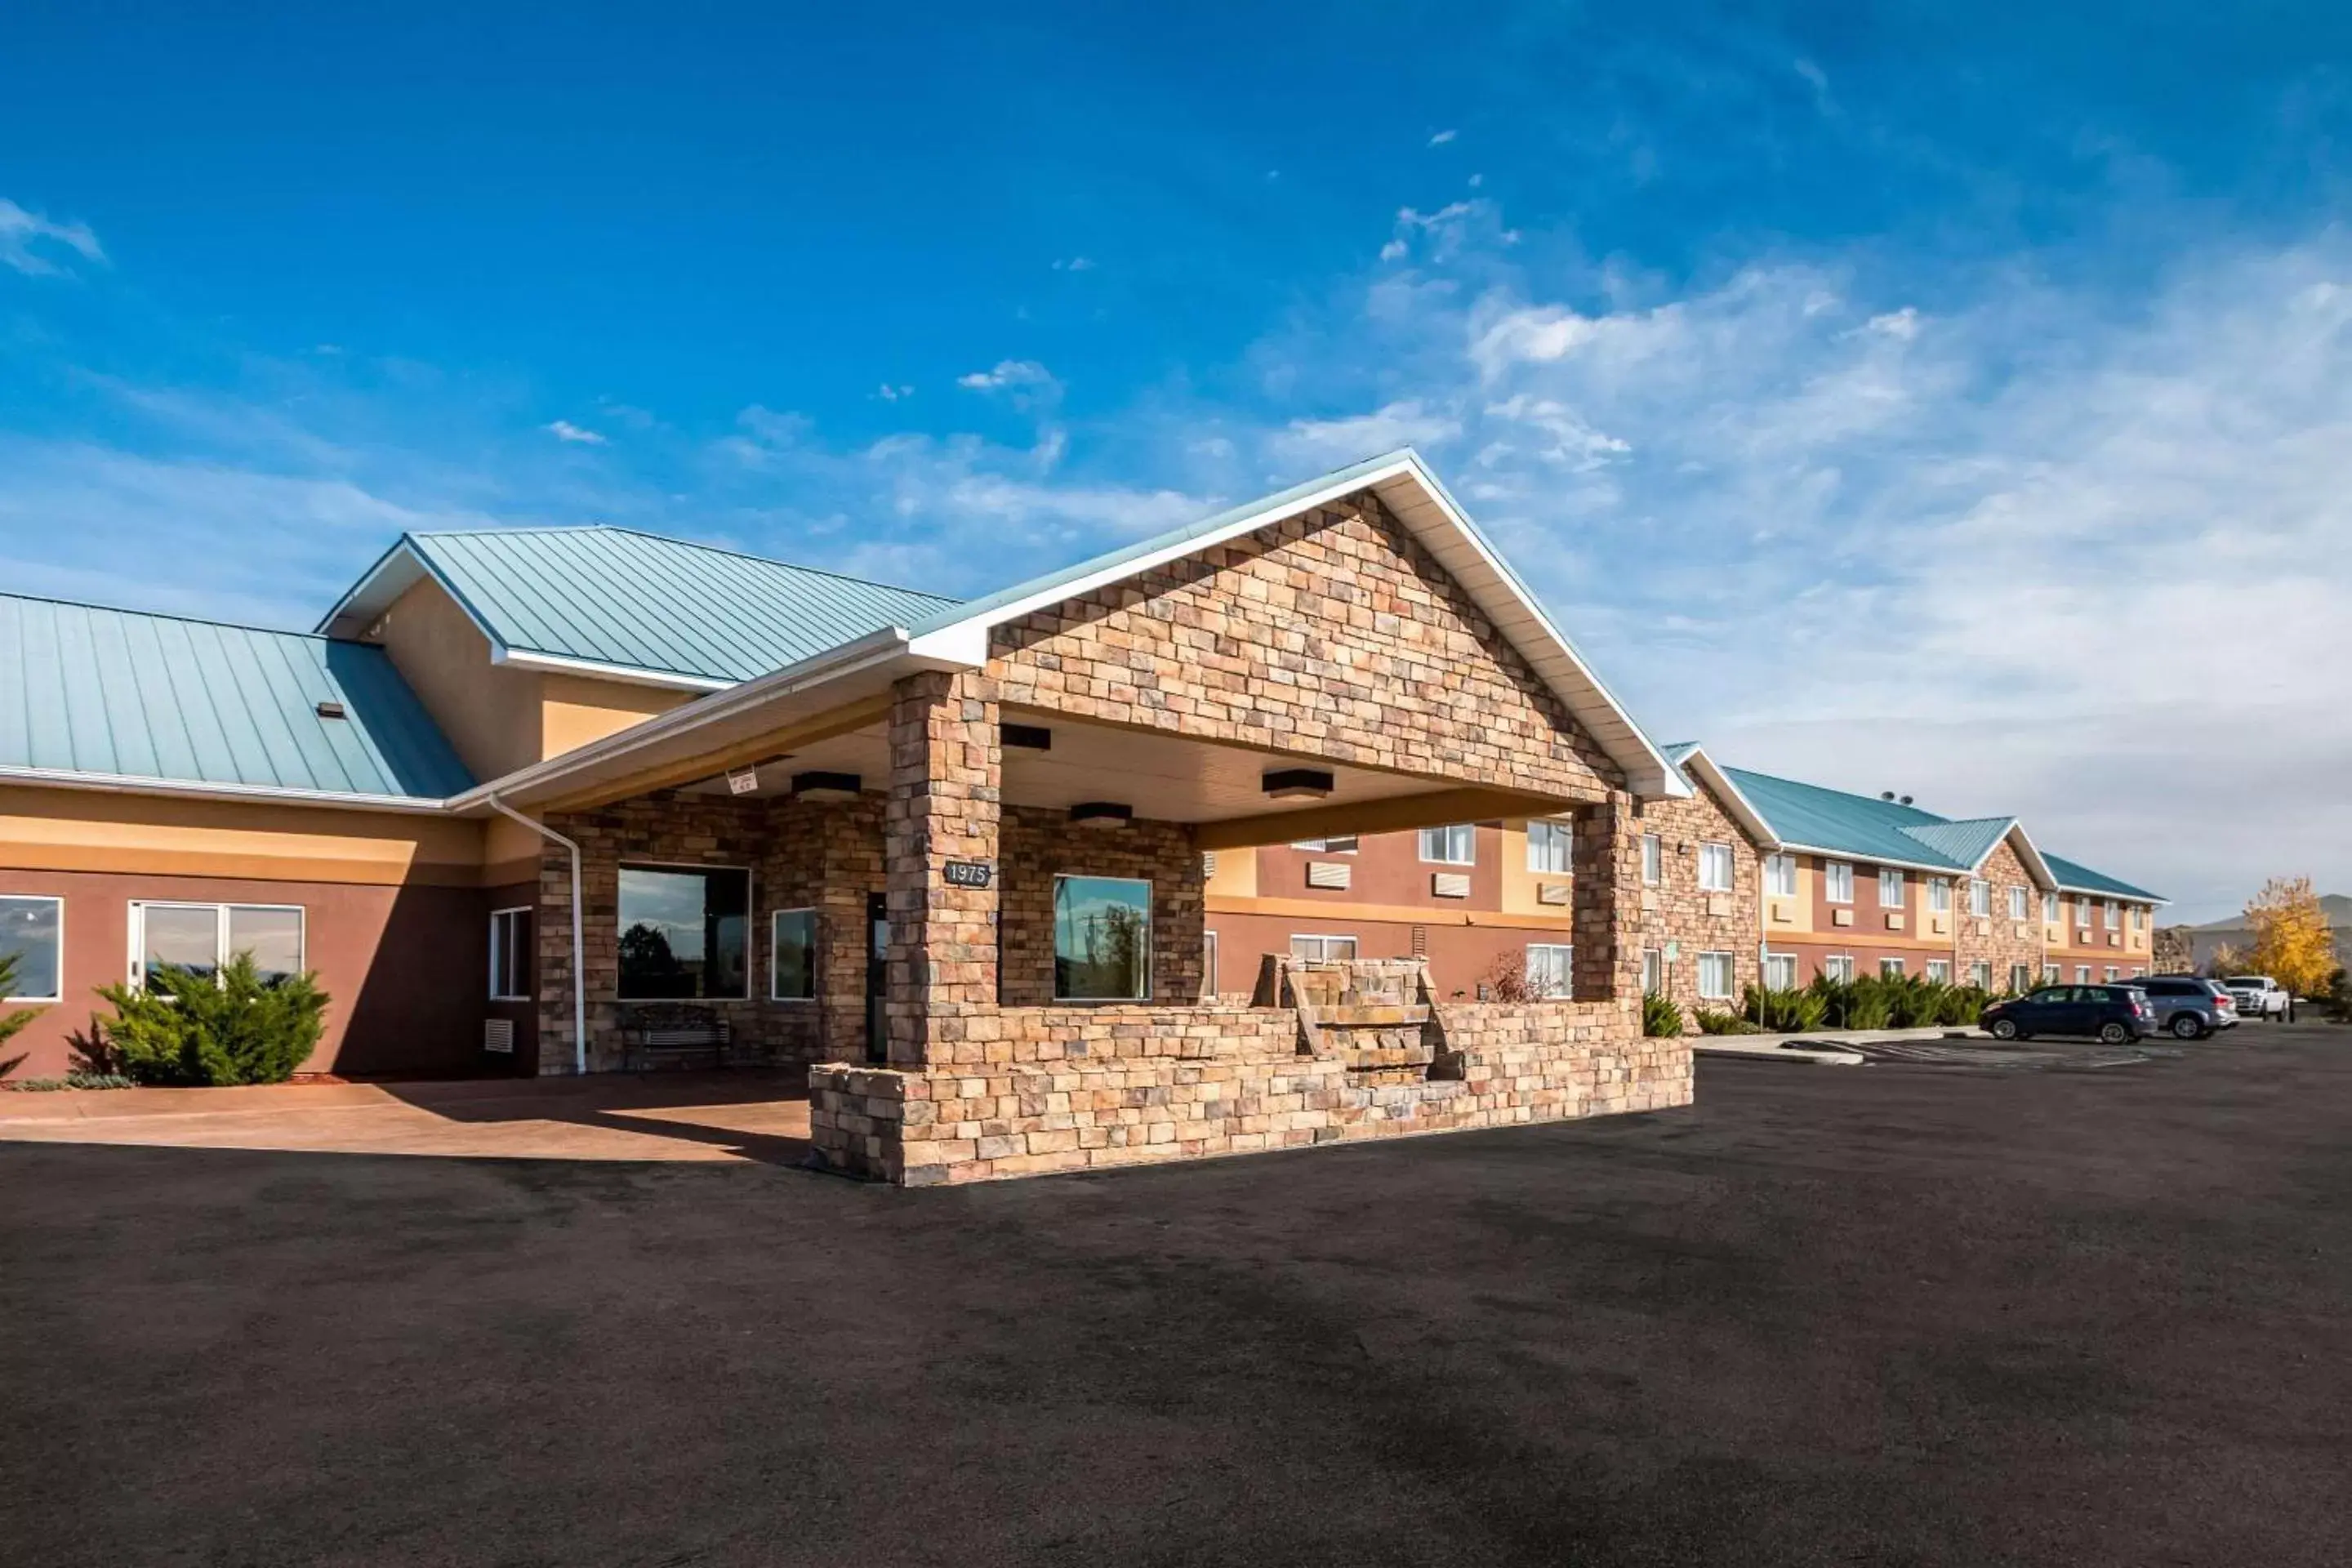 Property Building in Comfort Inn Green River National Park Area